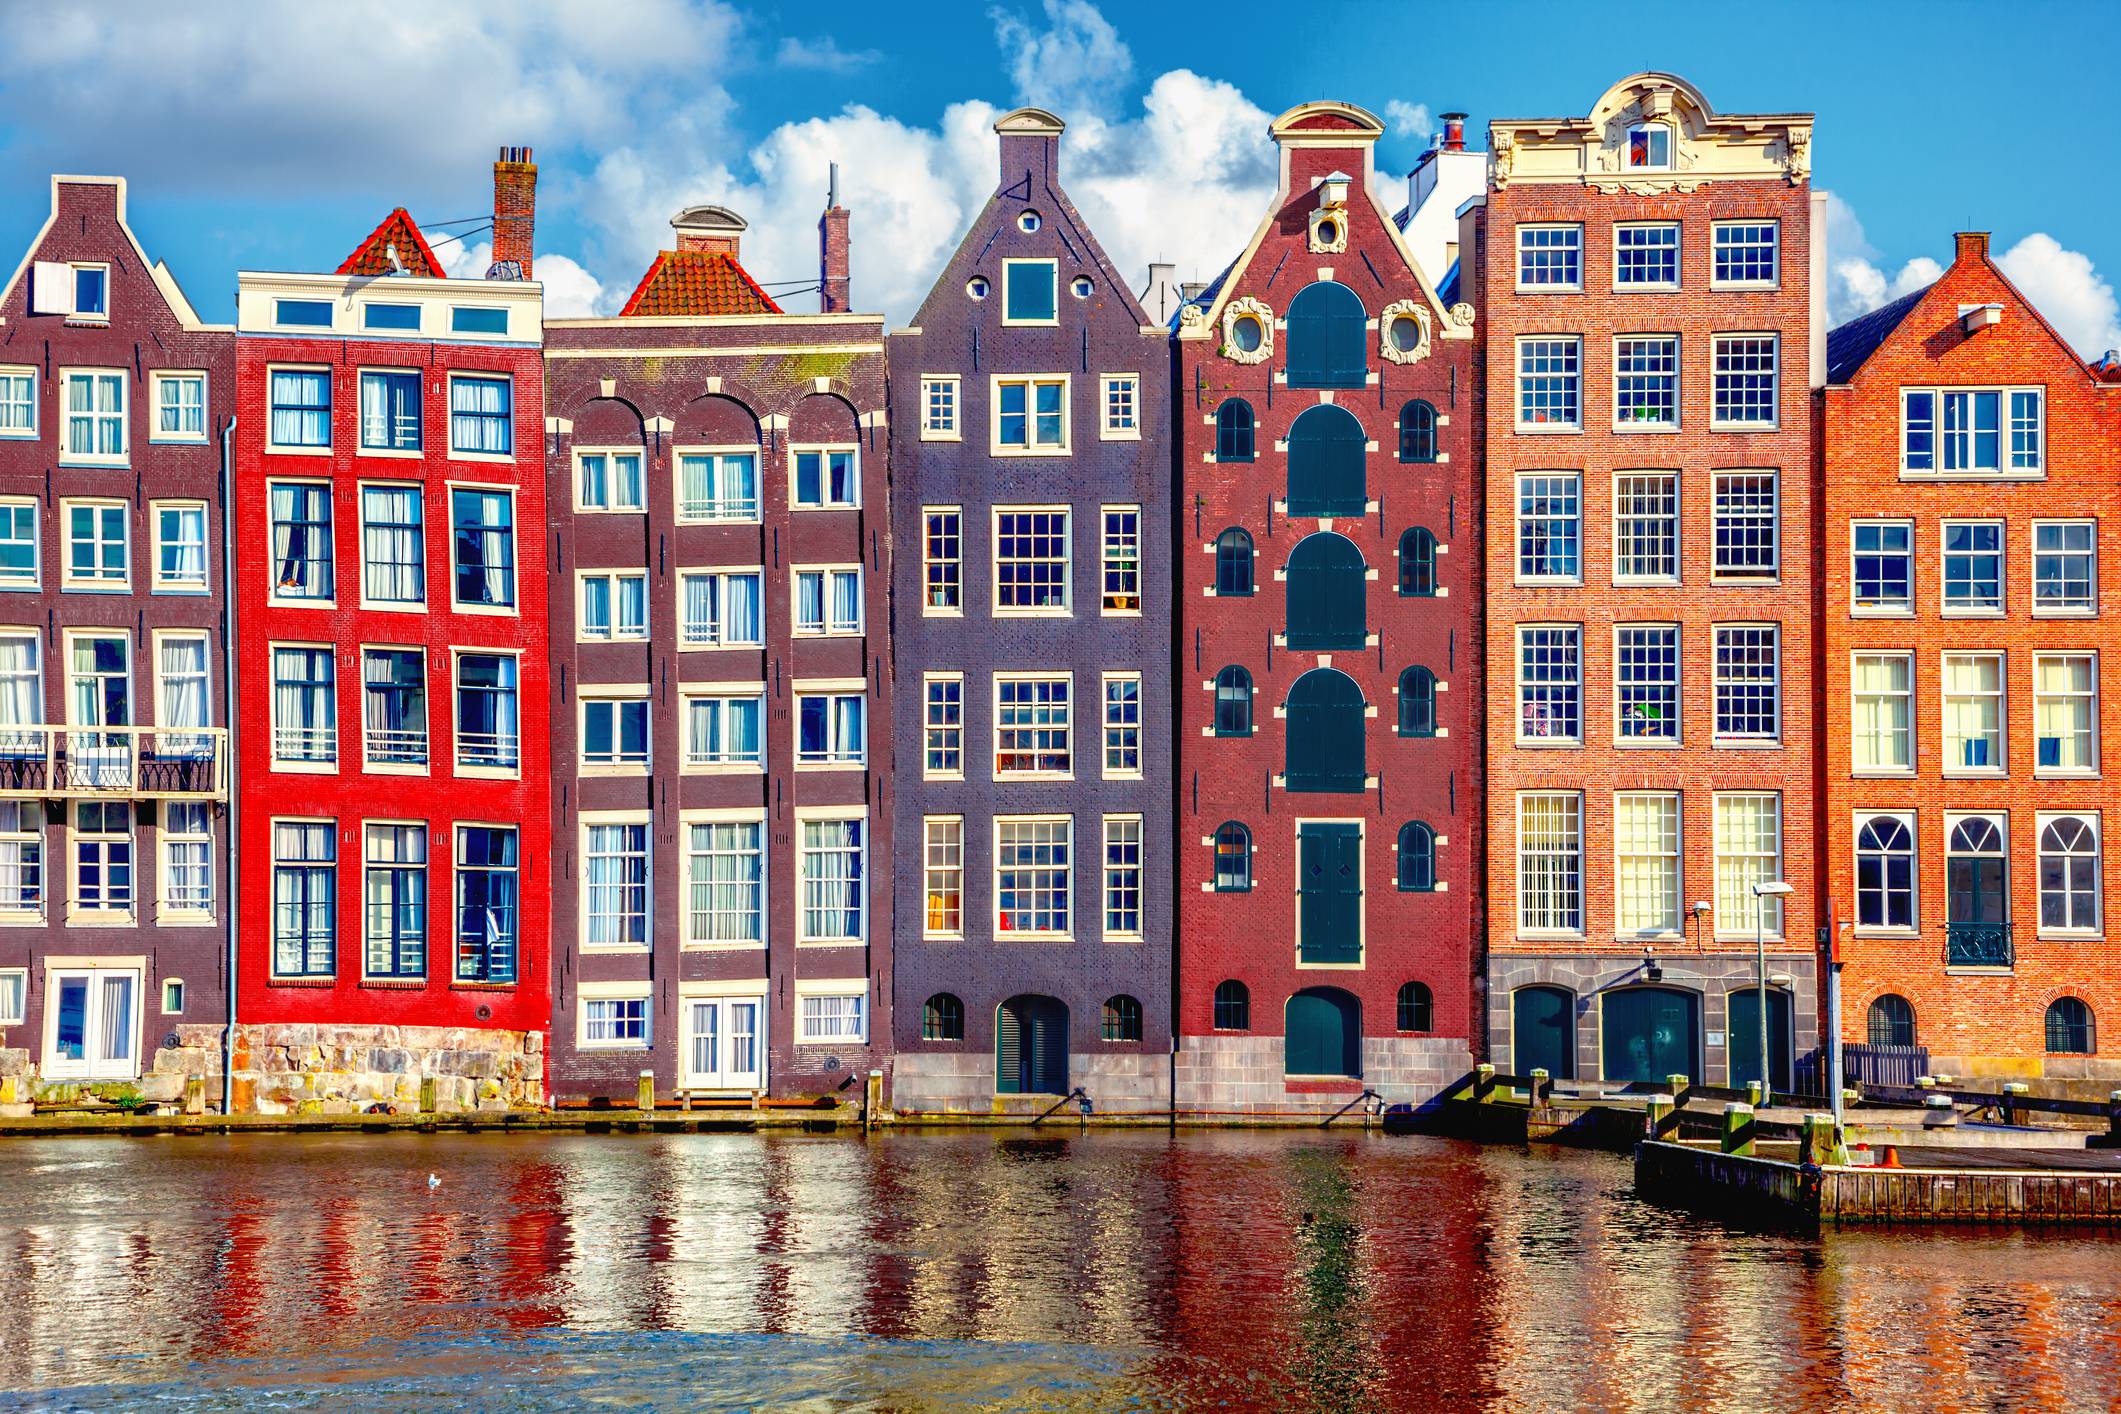 Why Do Amsterdam Houses Crooked and Leaning Forward?